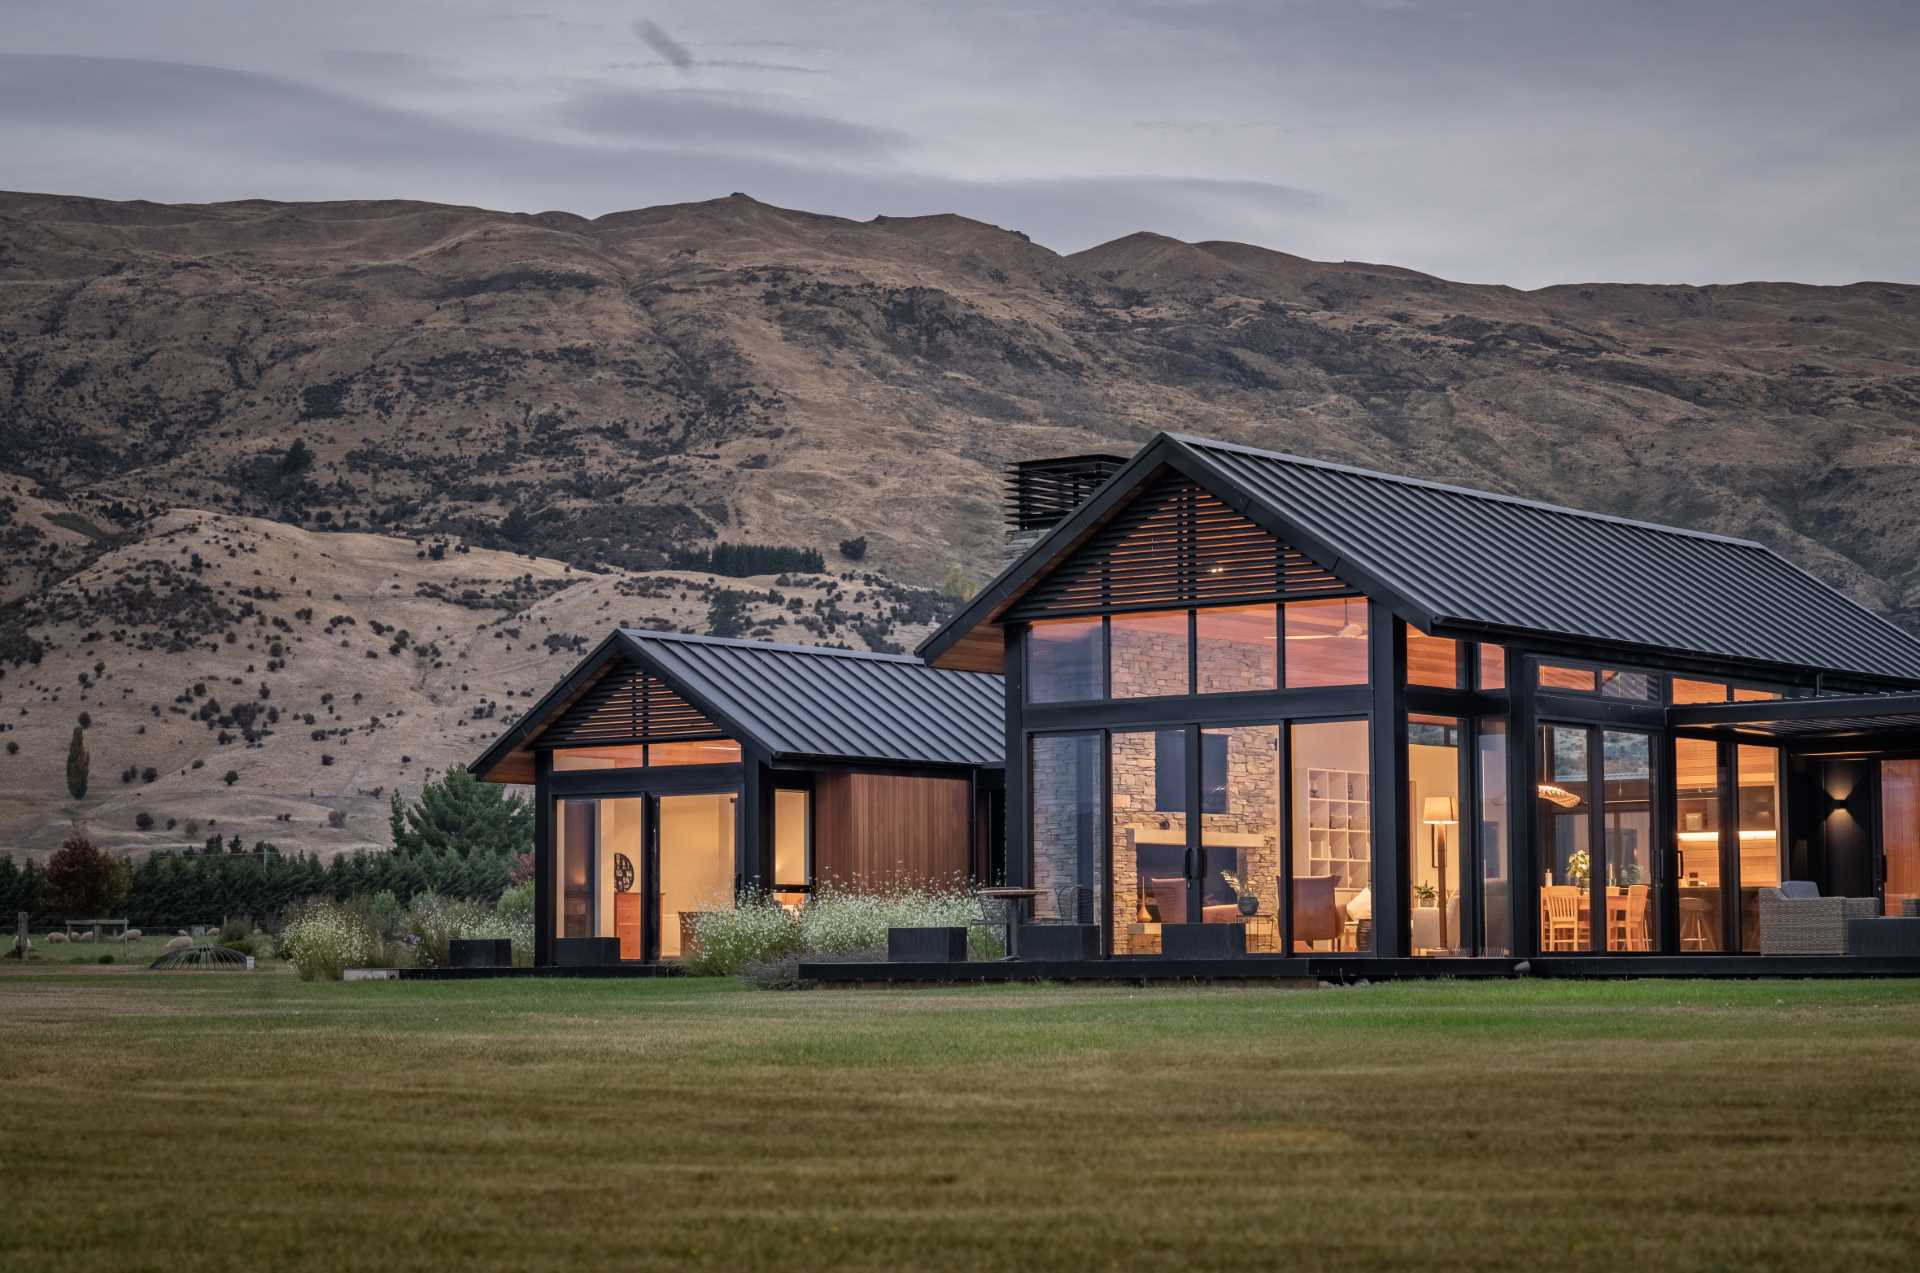 This modern house uses cedar in the build to add warmth, while metal was chosen as a low-maintenance contrasting material, and stone accents were added using Schist.